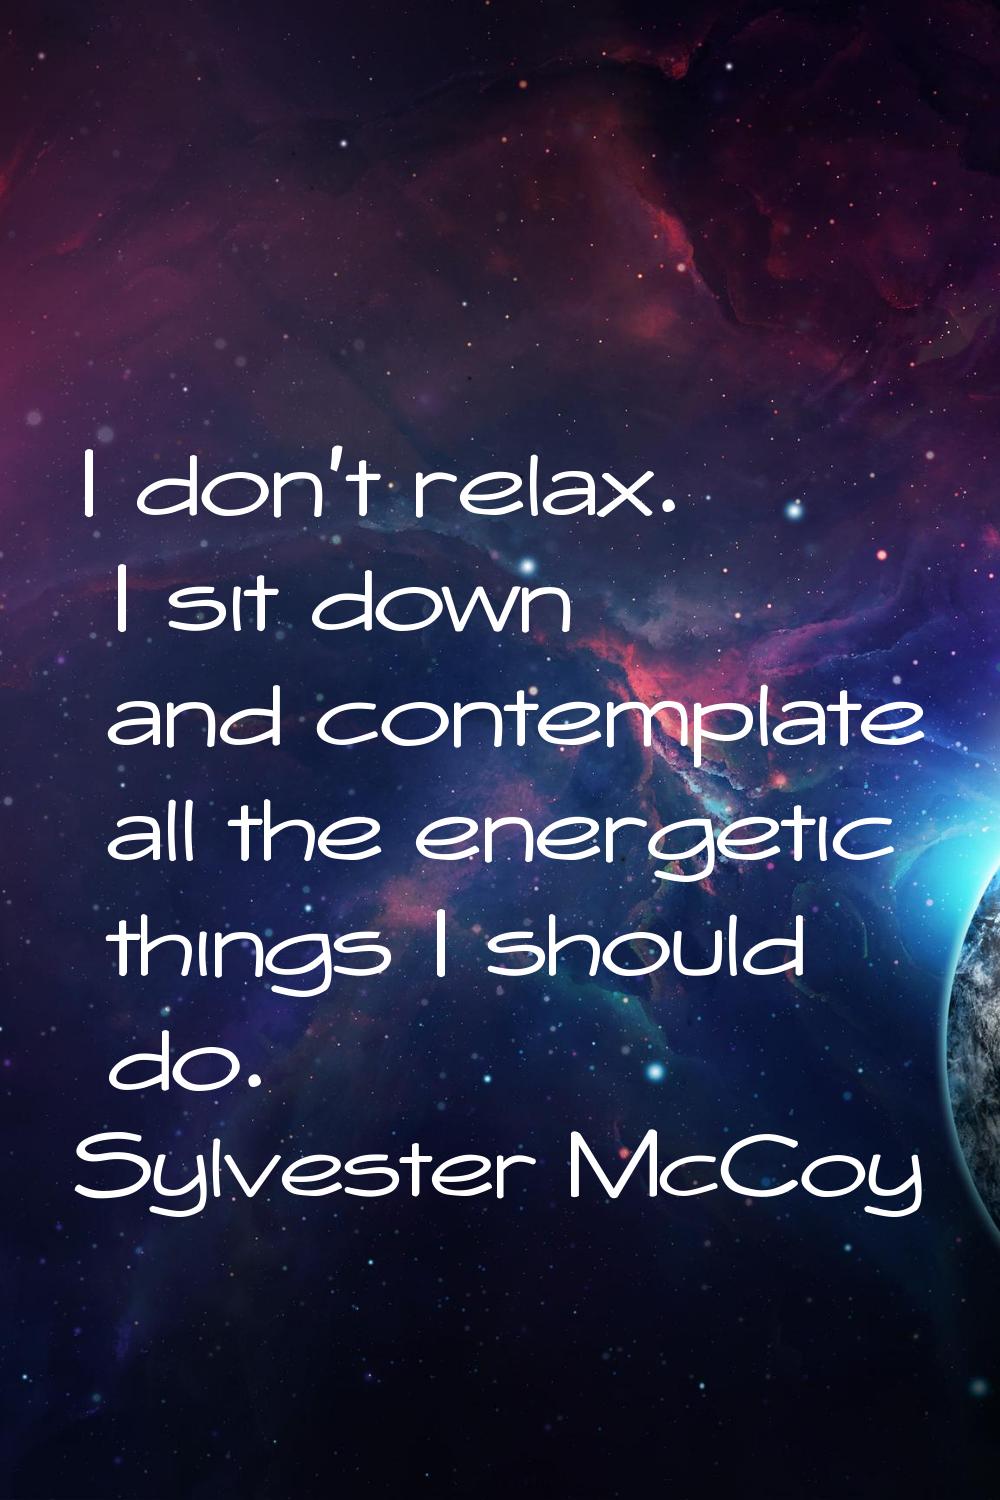 I don't relax. I sit down and contemplate all the energetic things I should do.